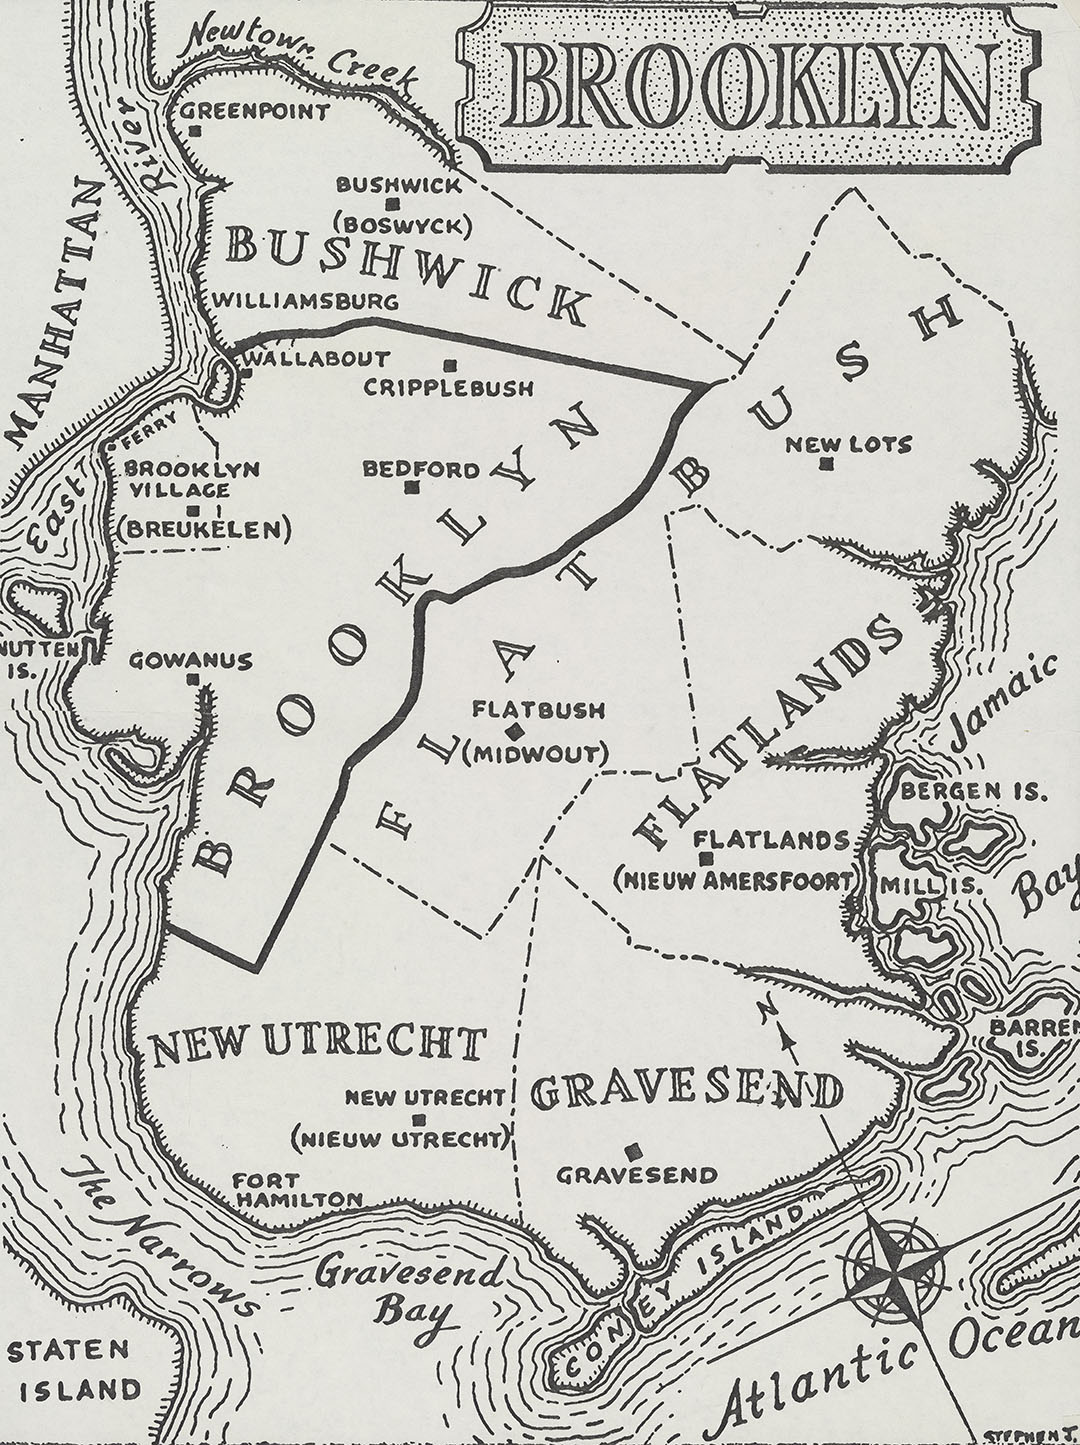 The Six Towns of Brooklyn